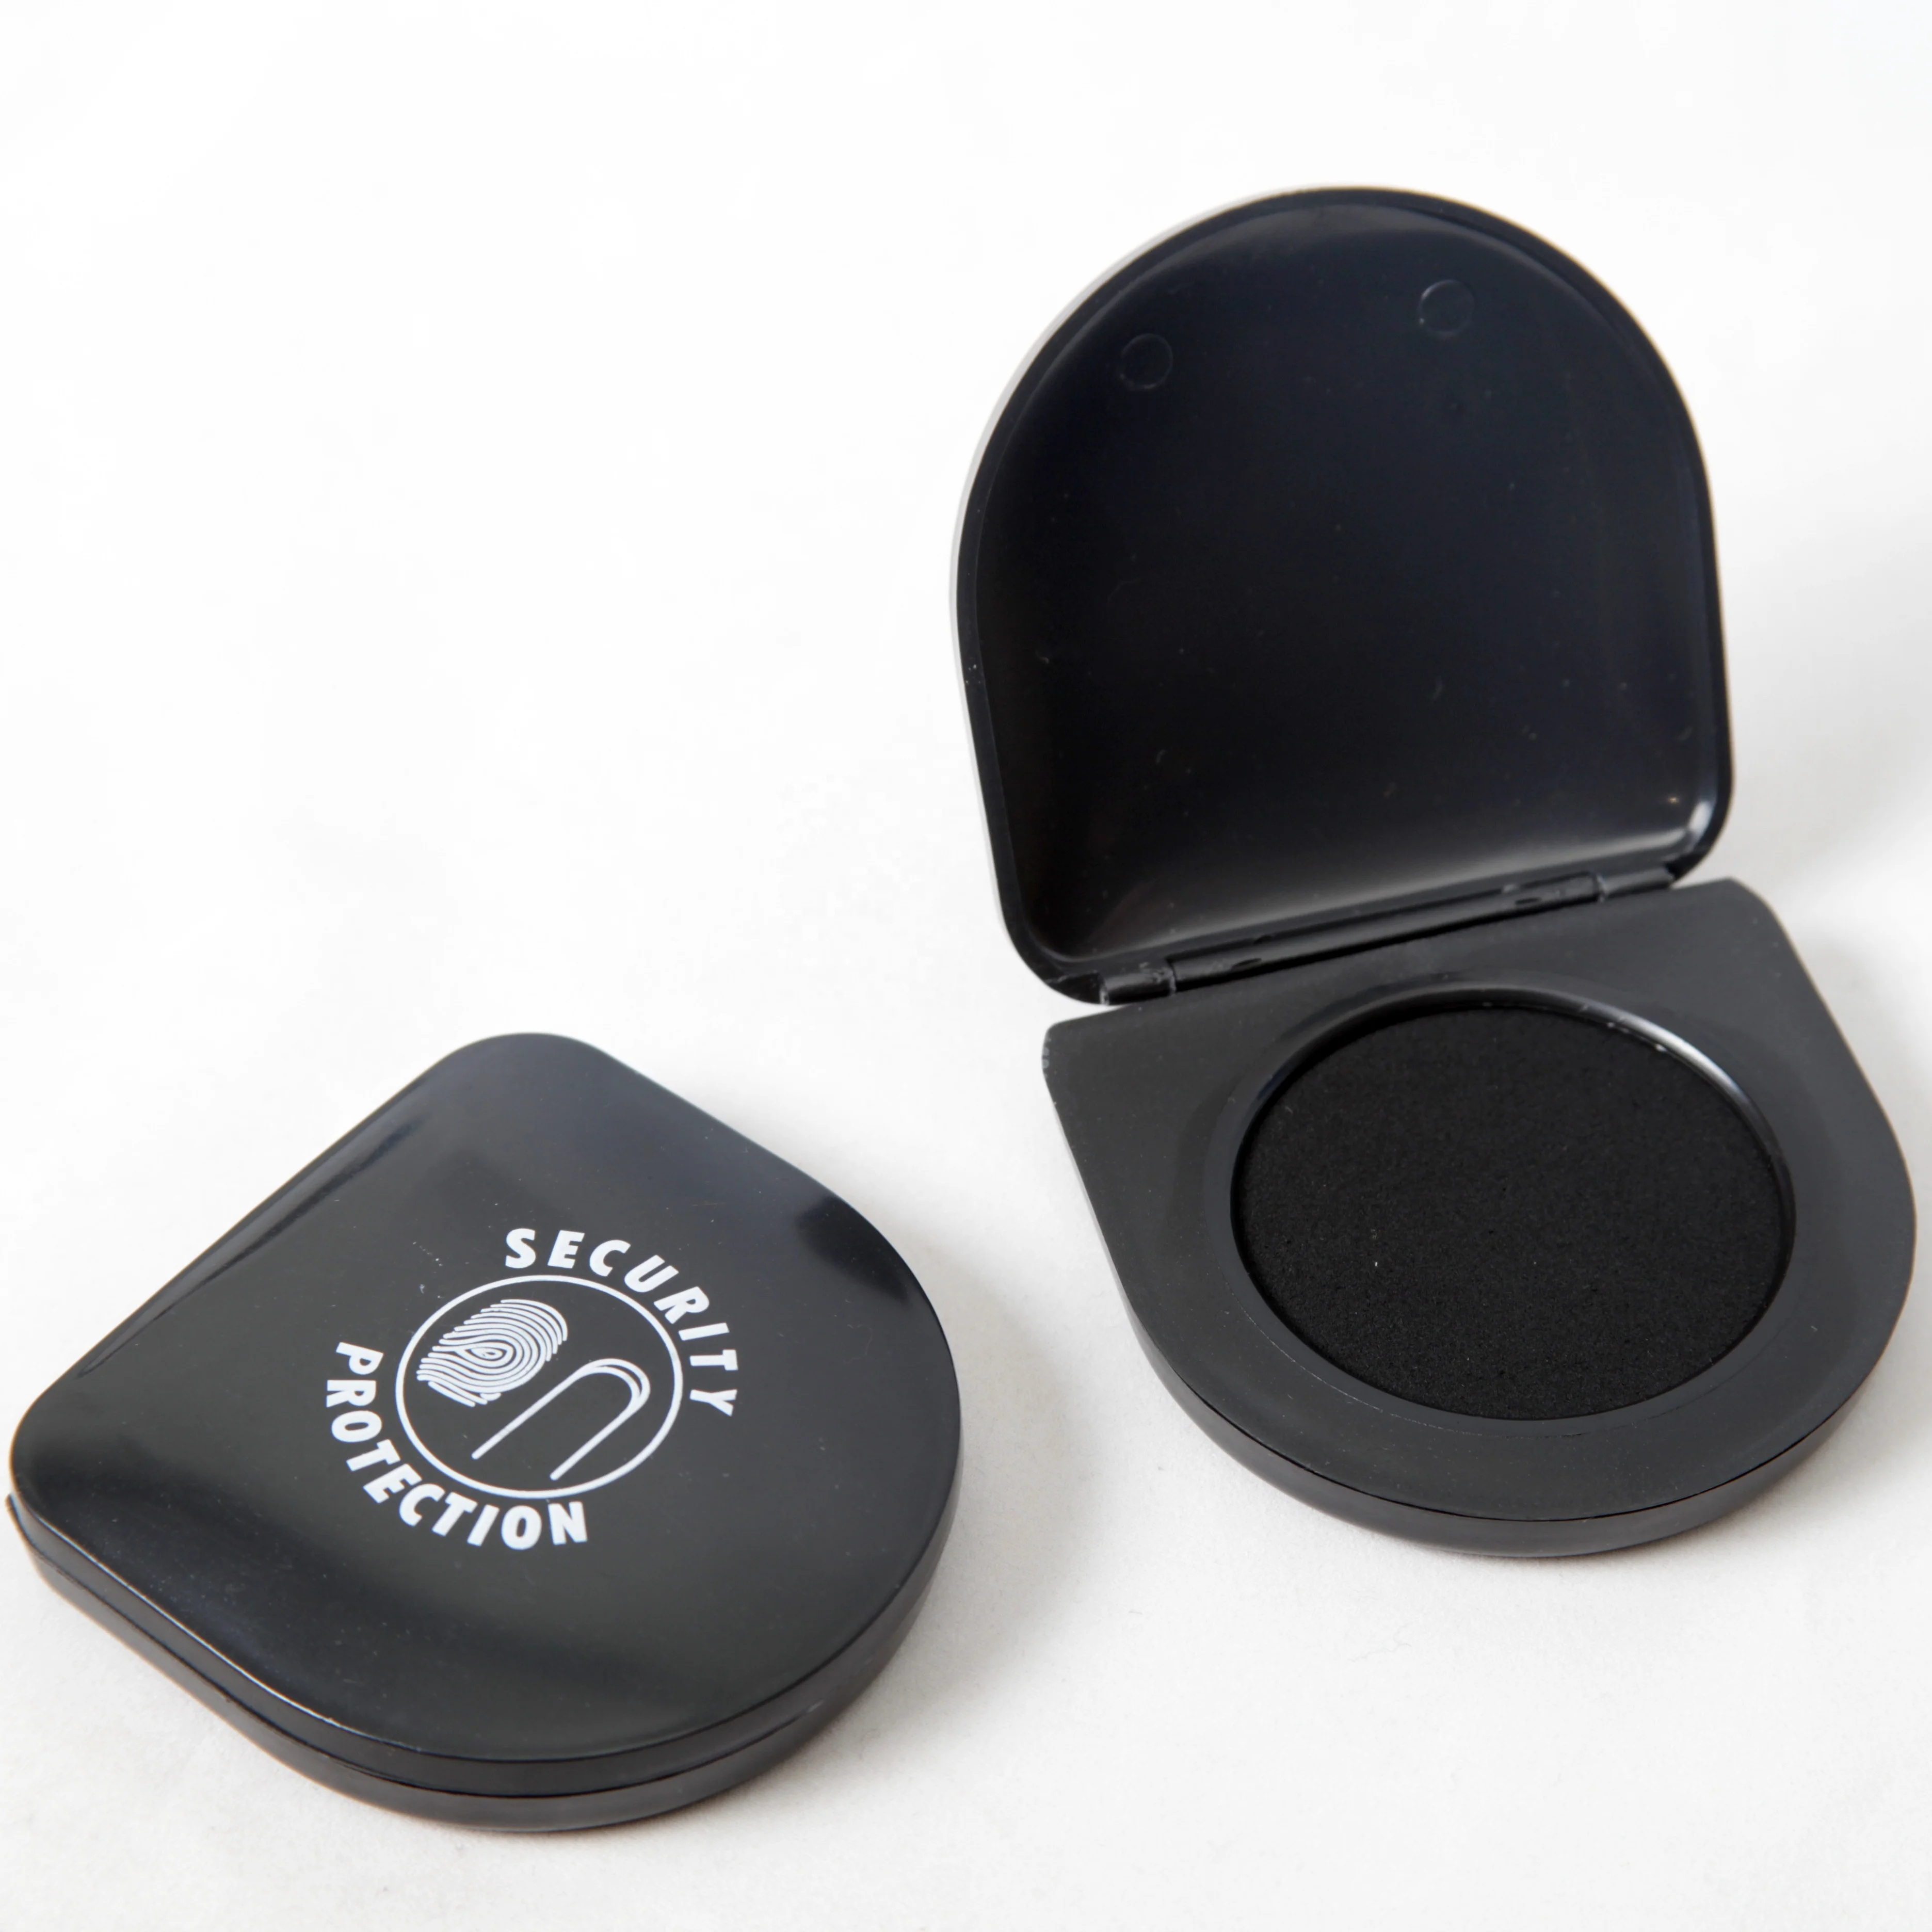 Thumbprint Fingerprint Ink Pad For Notary Supplies Identification